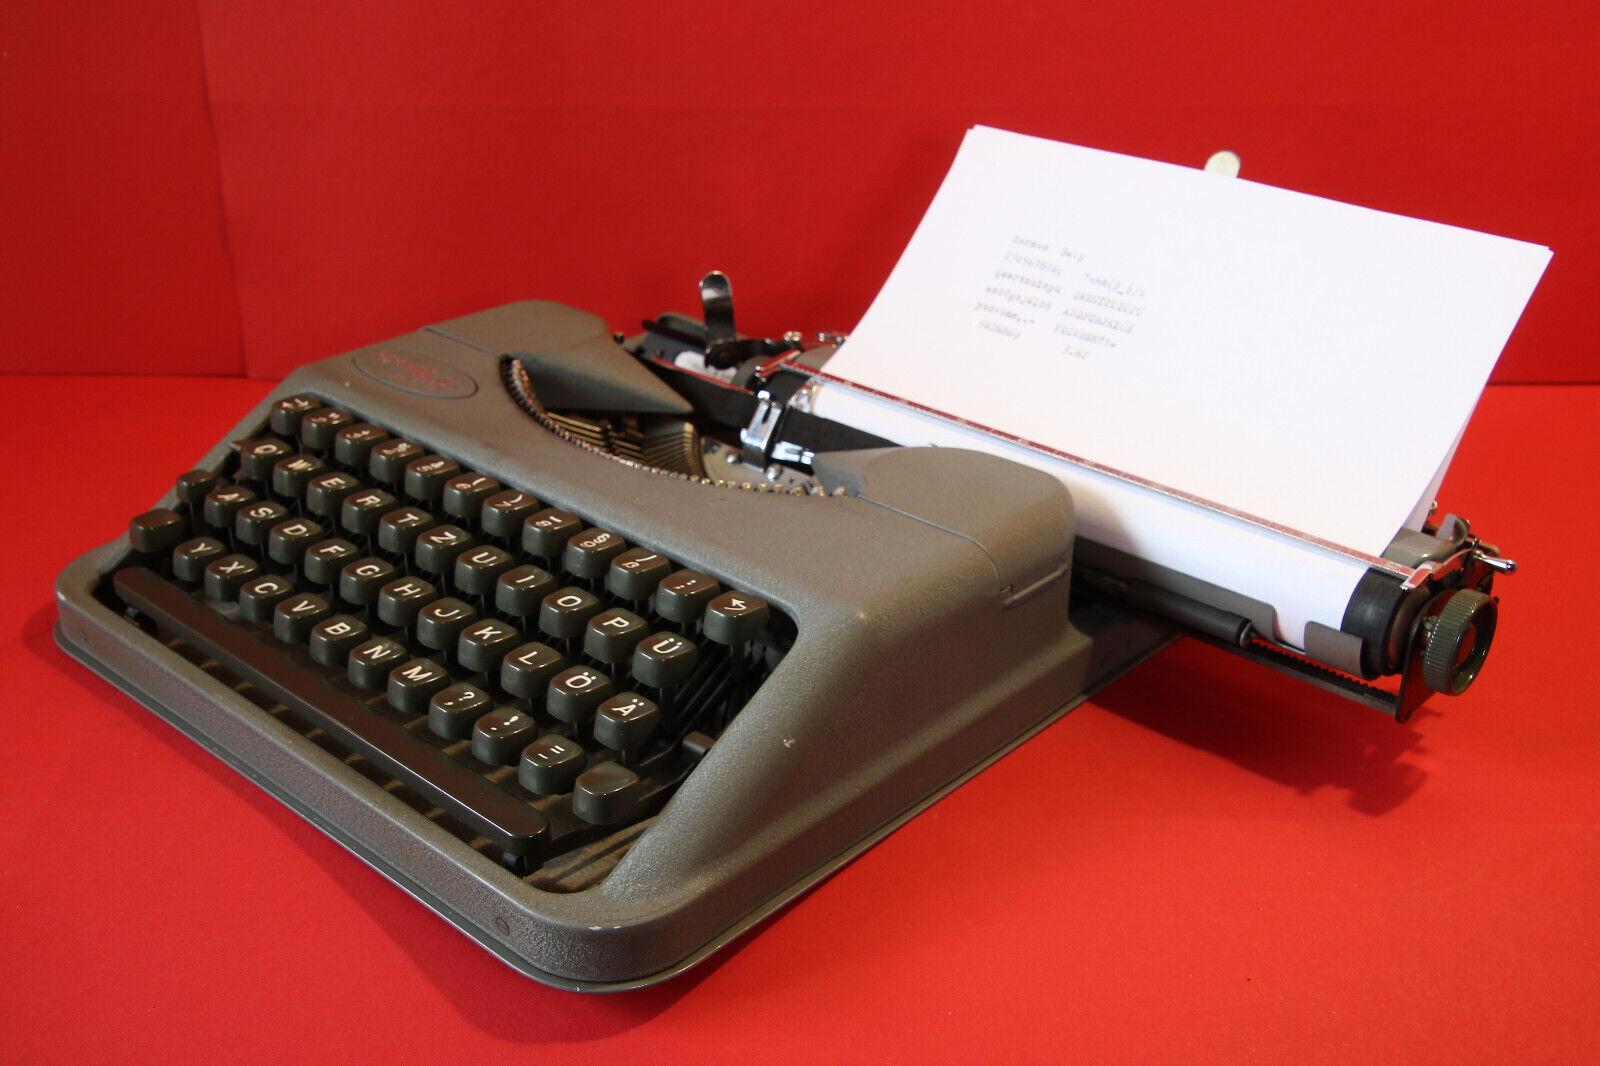 Vintage  Hermes Baby swiss Paillard Typewriter from 1955 serviced-tested-cleaned